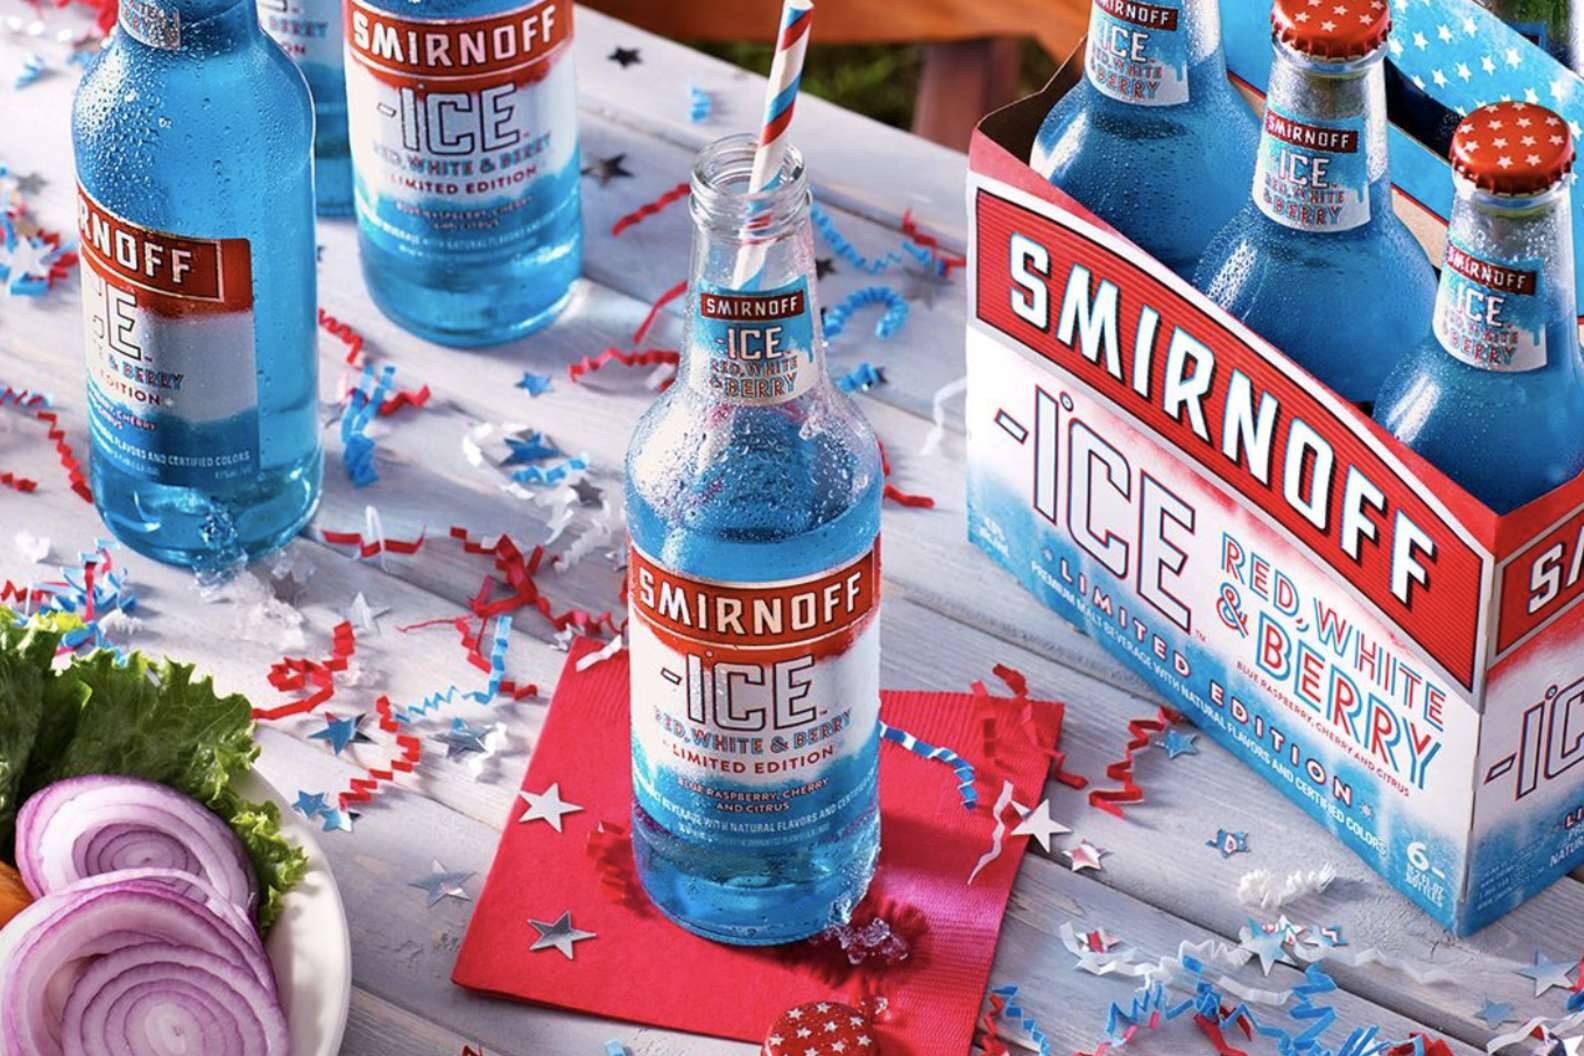 15-smirnoff-ice-red-white-and-berry-nutrition-facts